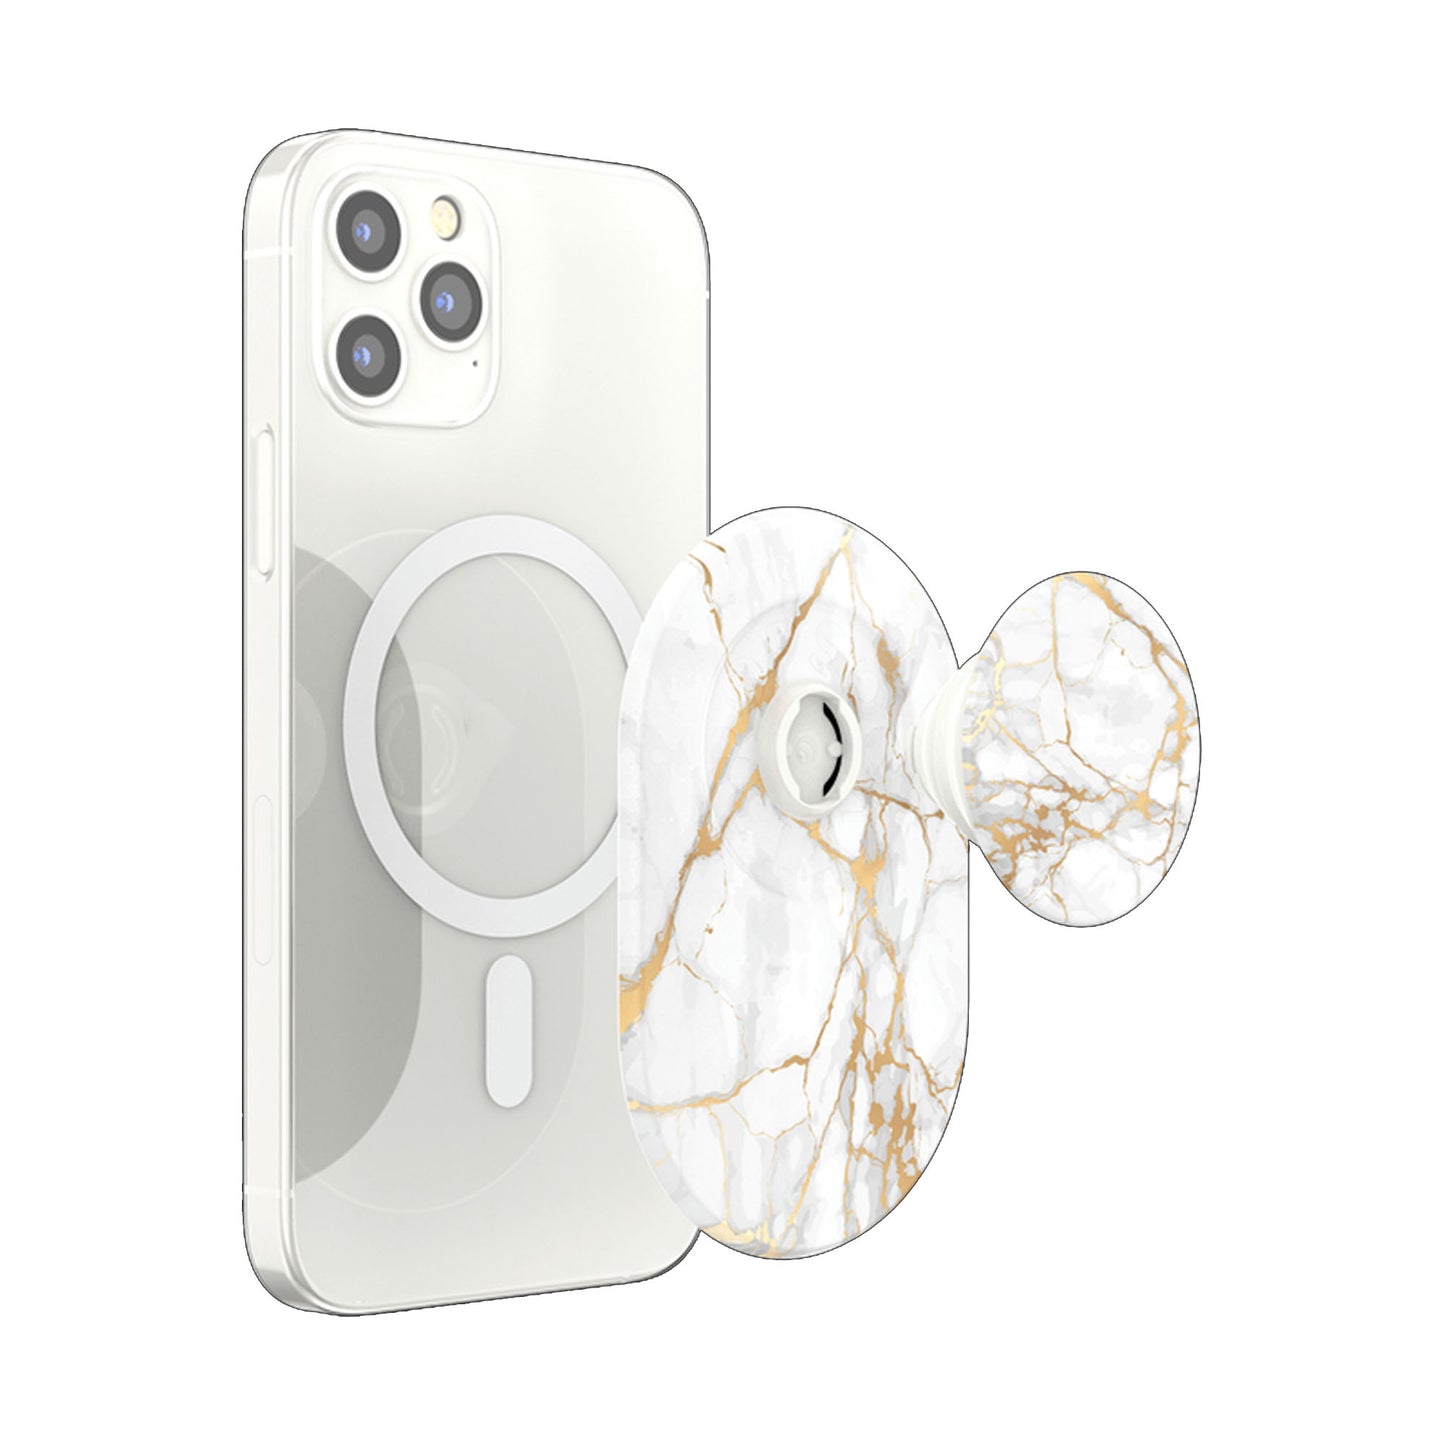 PopSockets Popgrip for Magsafe Magnetic phone grip and stand - Rose Gold Lutz Marble (Barcode : 840173715741 )